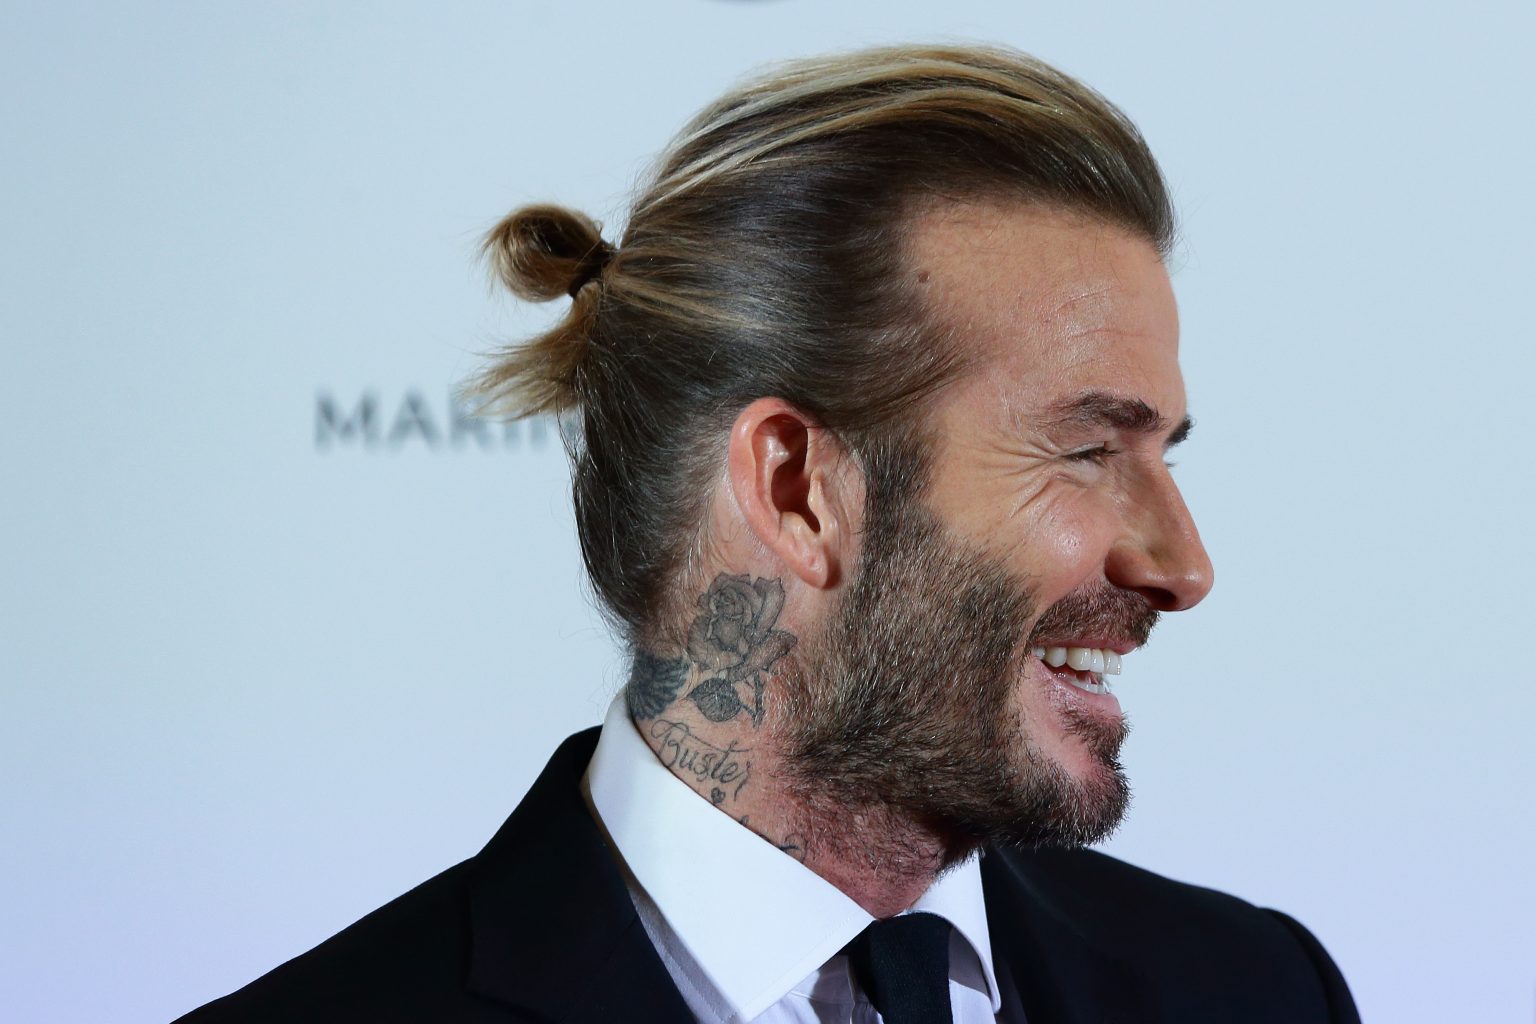 David Beckham's Best Haircuts & Hairstyles [2021 Edition]